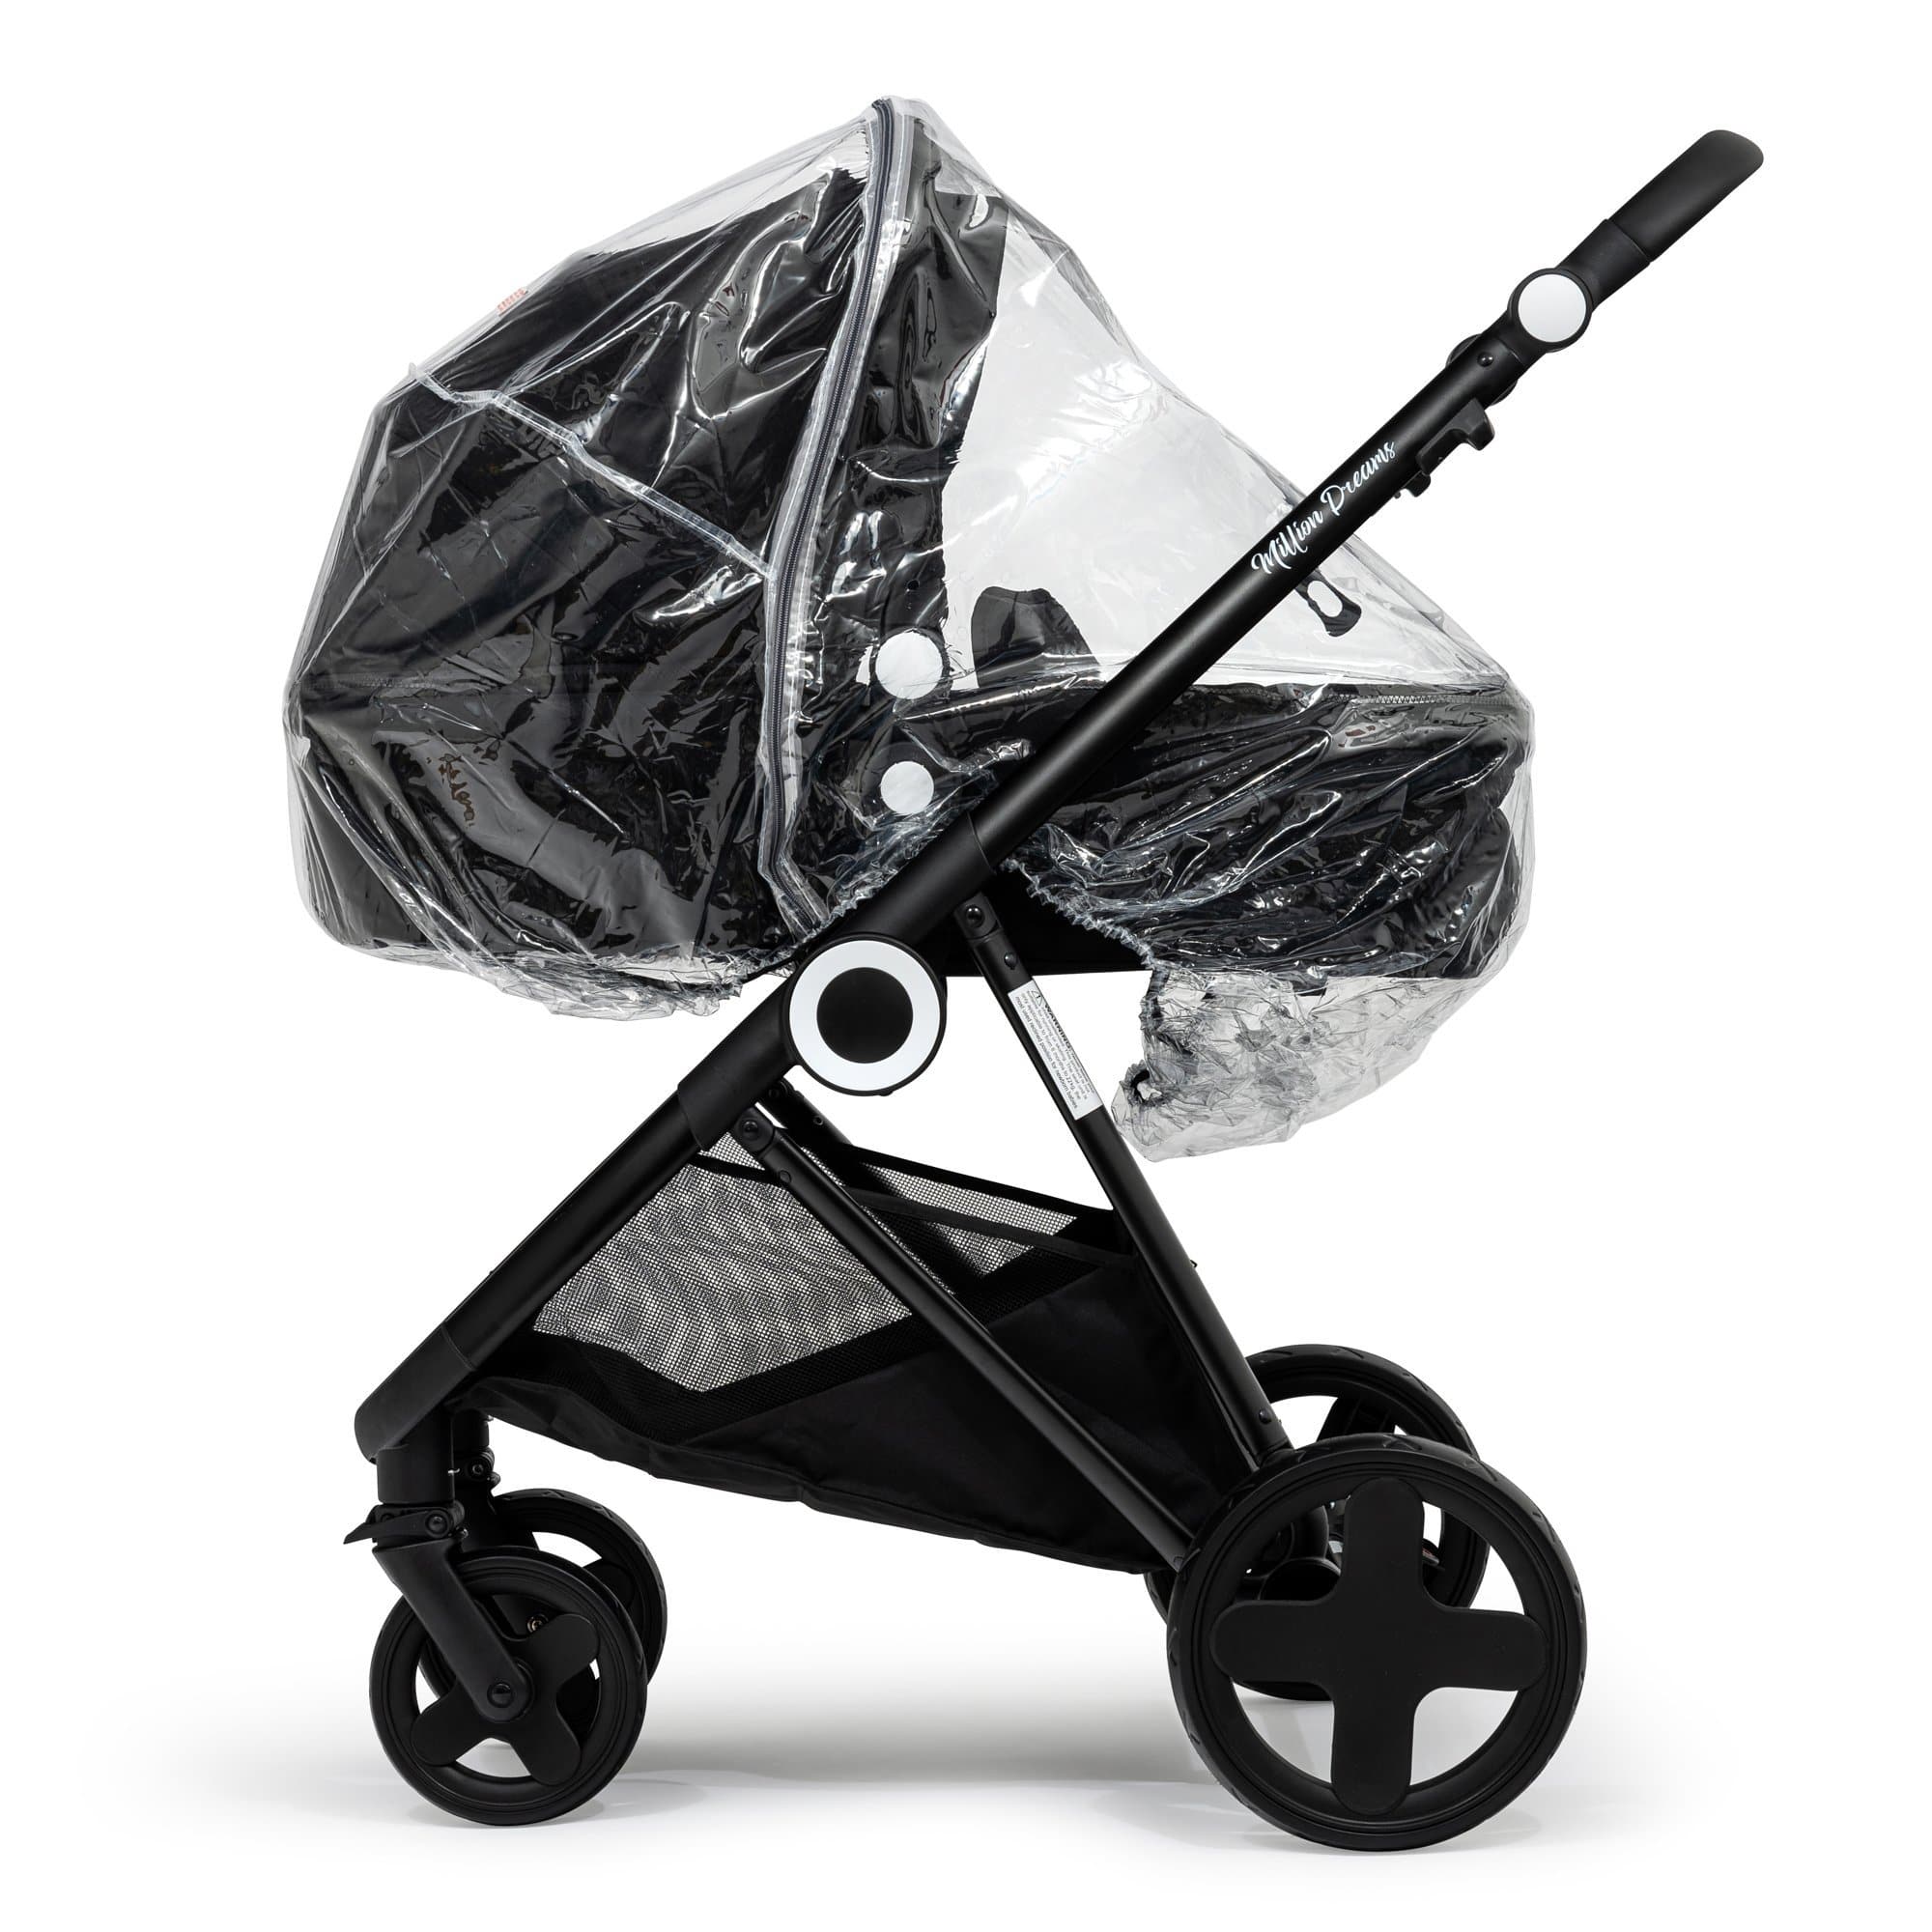 2 in 1 Rain Cover Compatible with Baby Weavers - Fits All Models - For Your Little One